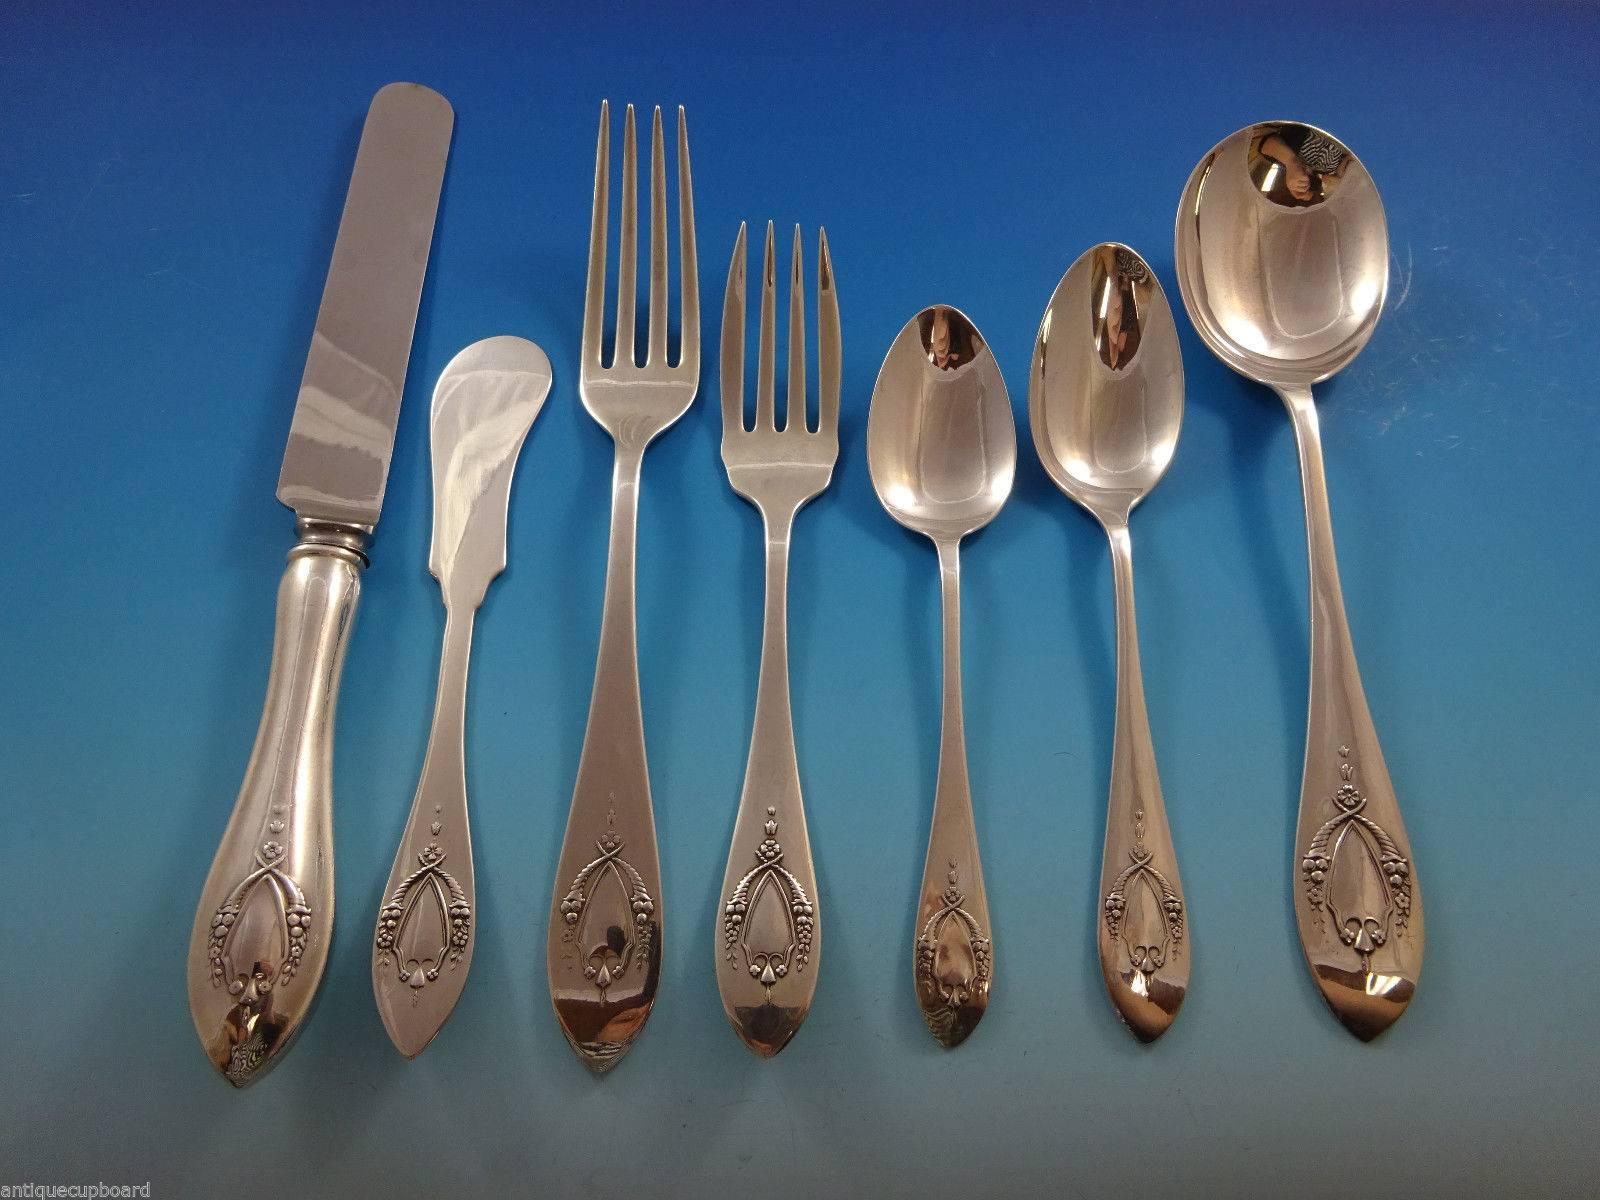 Mount Vernon by Lunt sterling silver flatware set - 91 pieces. This set includes:

12 knives, 8 1/2